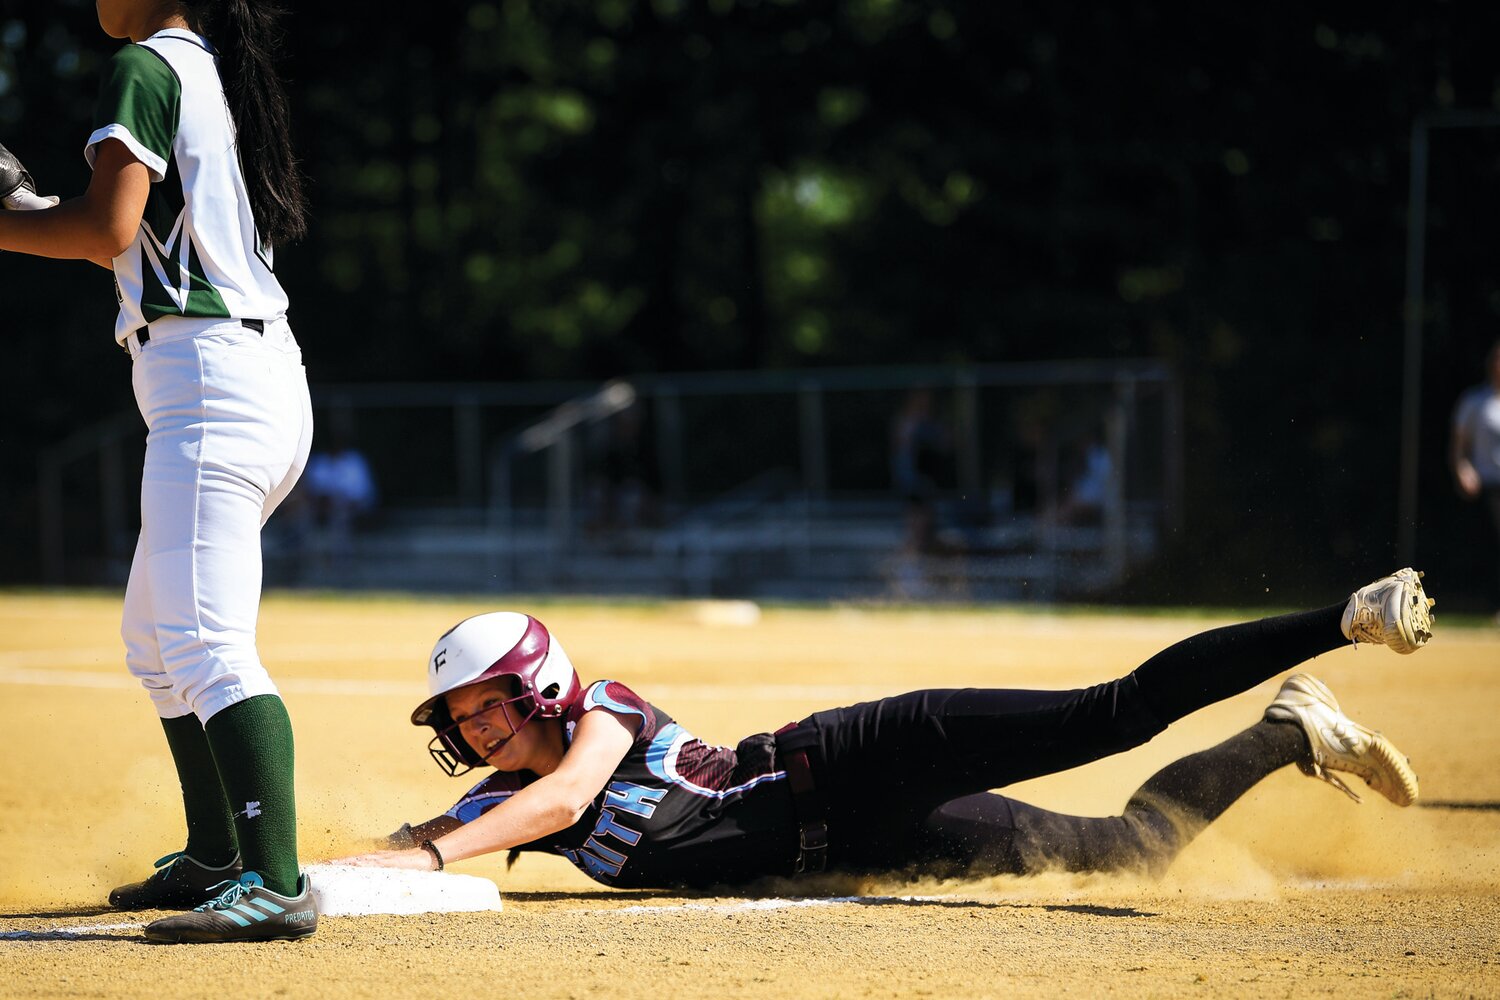 Faith Christian’s Kamryn Pepkowski reaches for the bag ahead of the throw in the third inning.